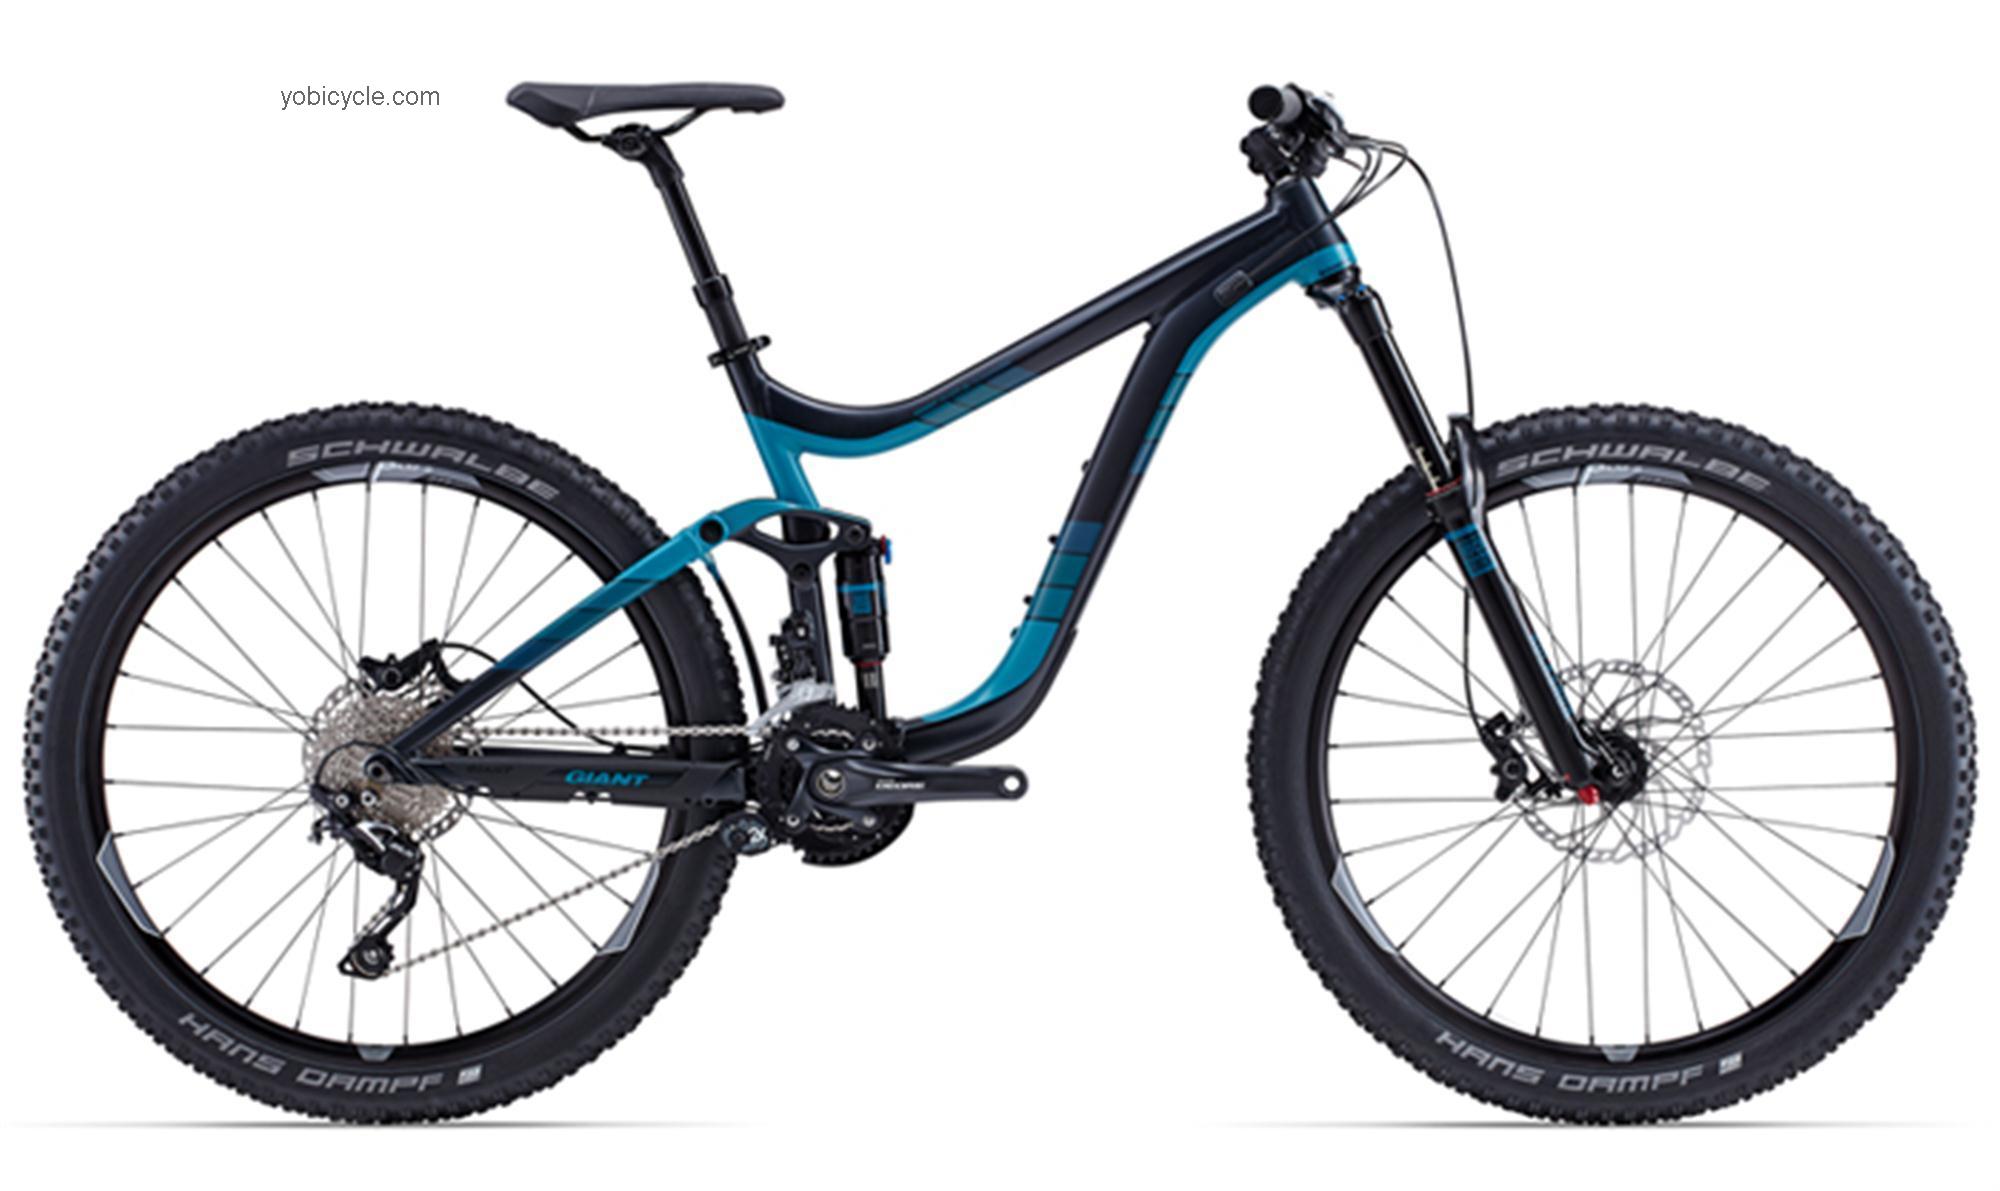 Giant Reign 27.5 2 2015 comparison online with competitors